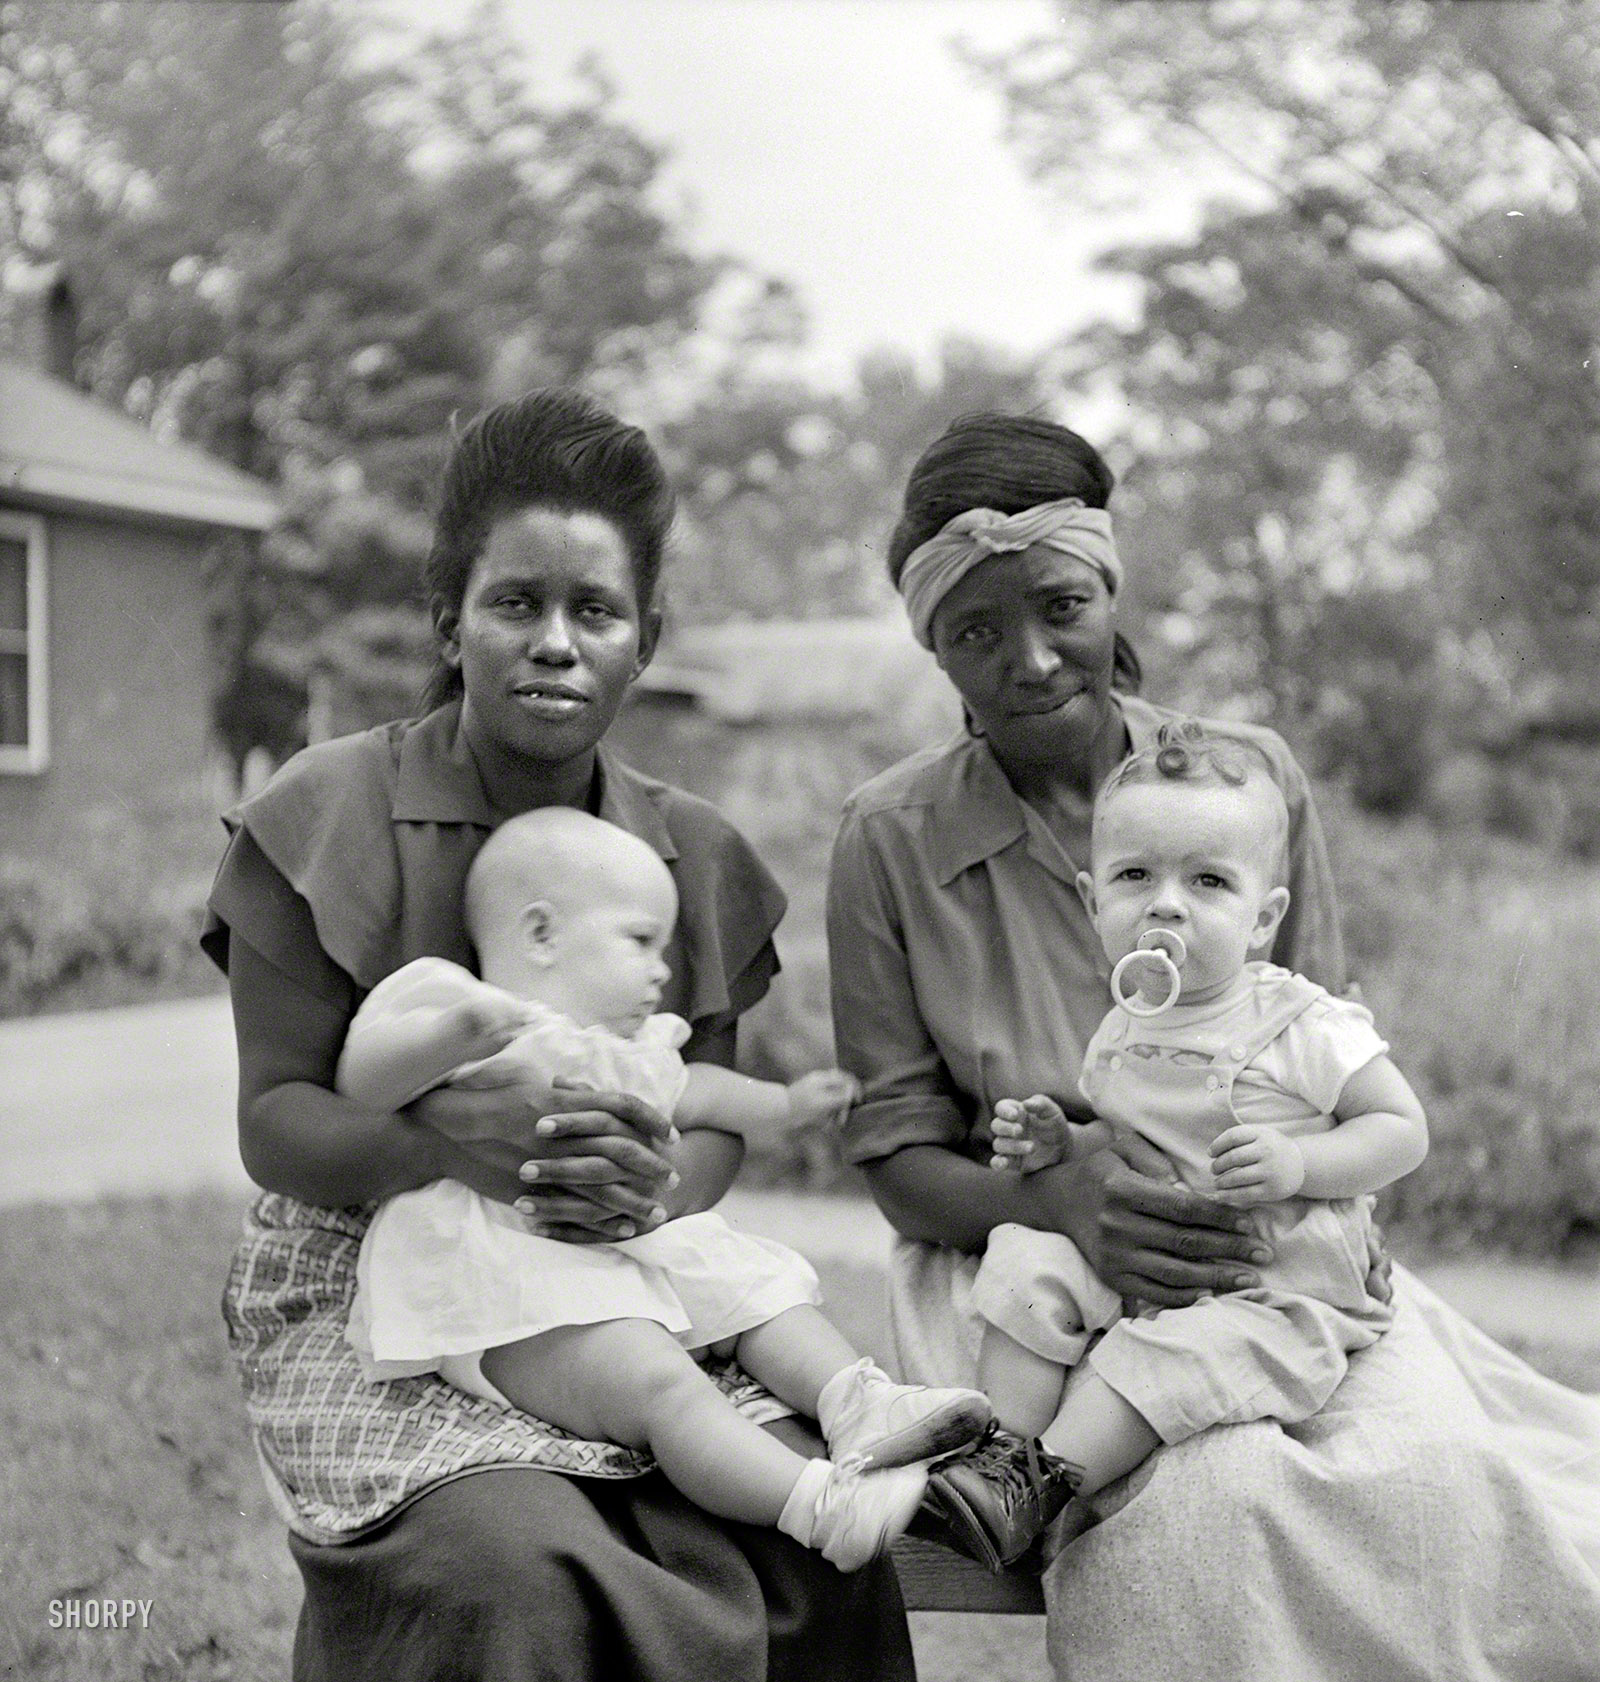 1951, somewhere in the Southeast. "Negro maids and their white employers' babies." Photo by John Vachon for a Look magazine assignment on "The South" in what could have been a prologue to "The Help." View full size.